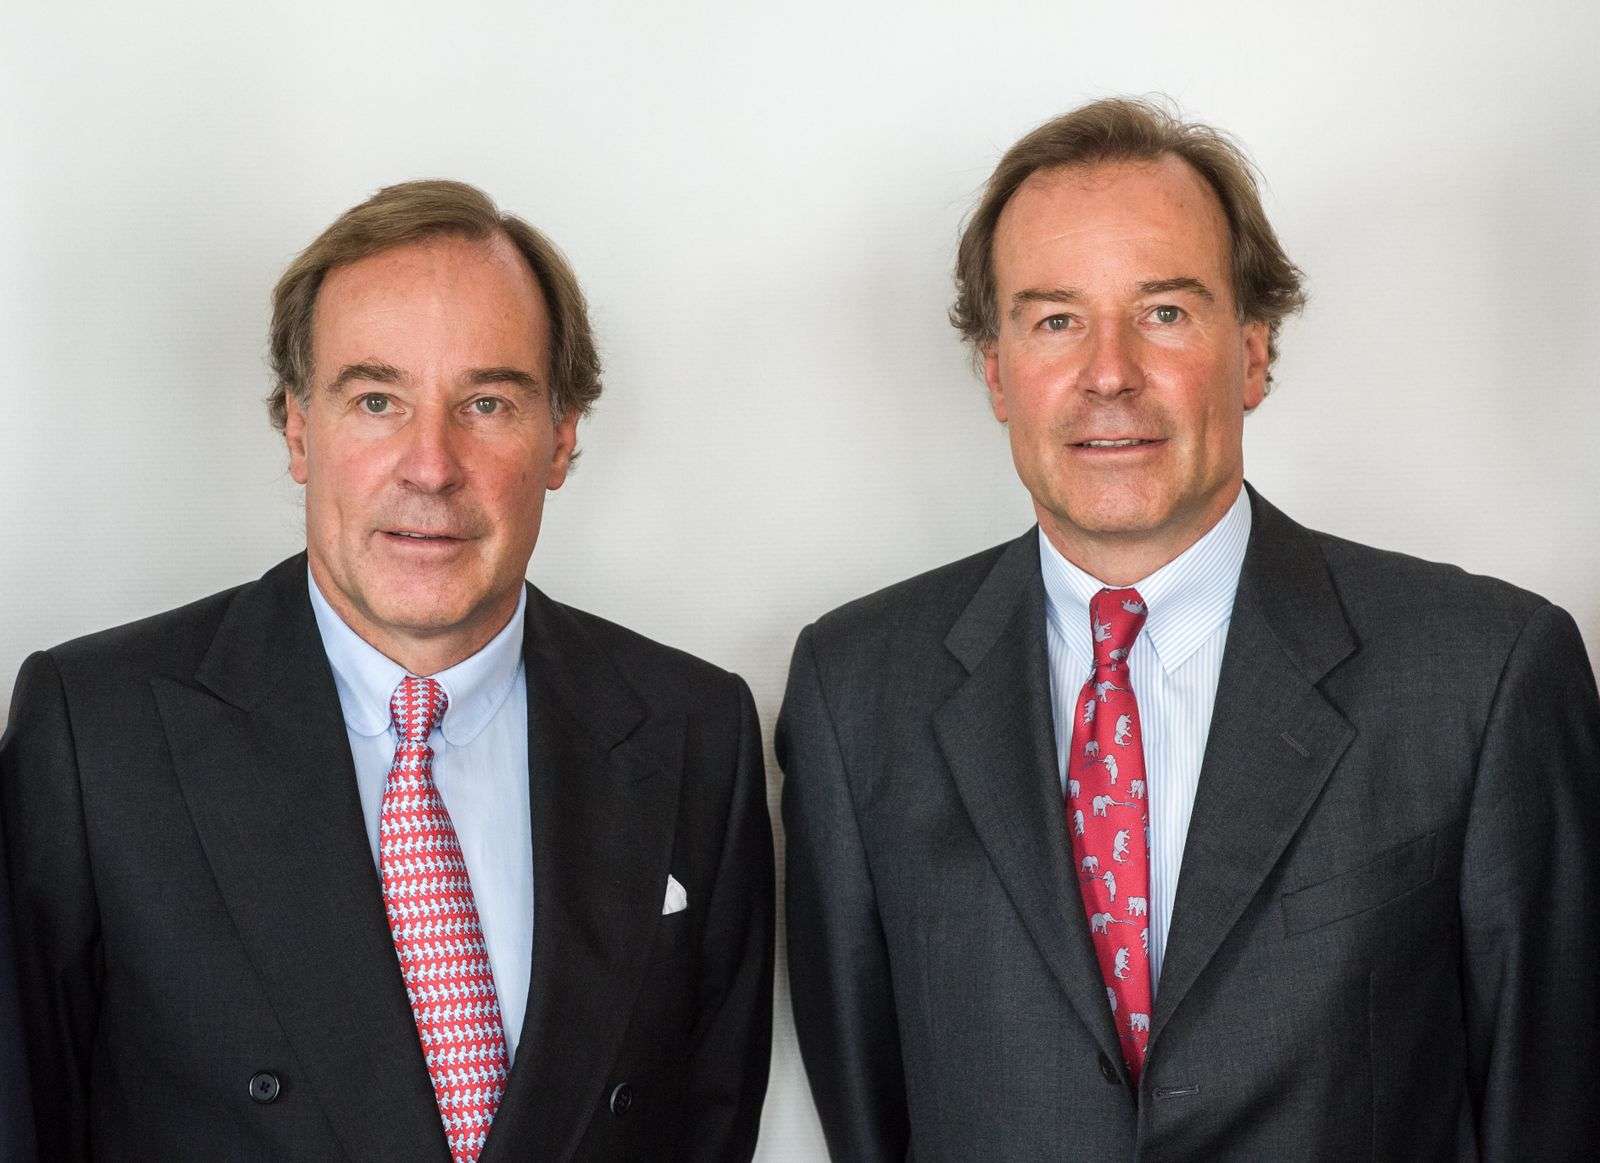 The property of these brothers reached $ 22 billion with the expectation of Corona vaccine 1